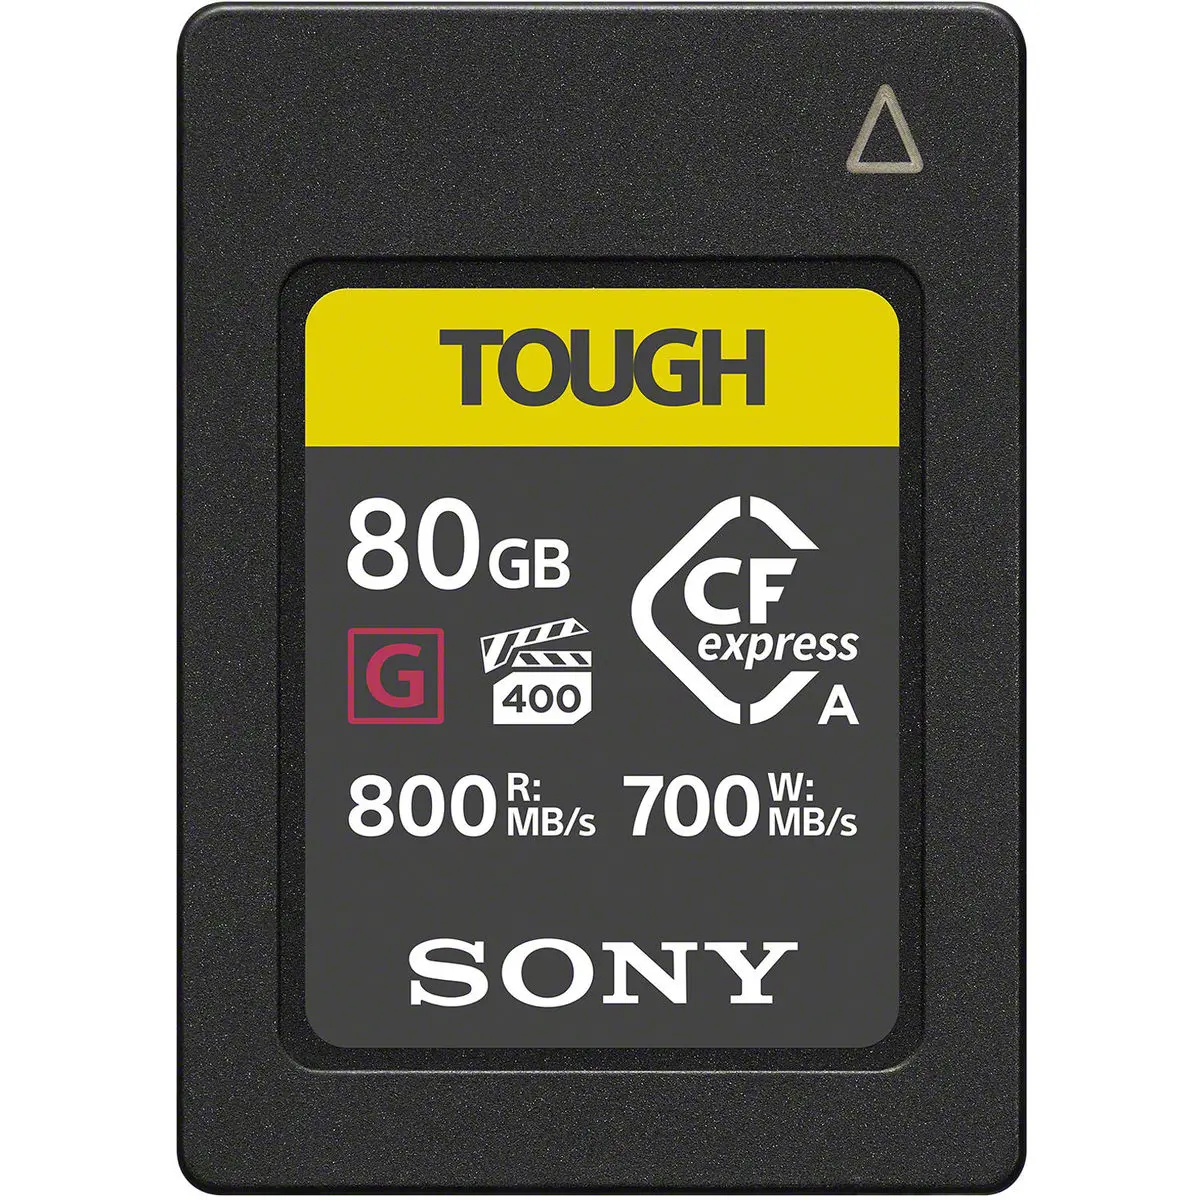 Main Image Sony CEA-G80T Tough 80GB 800mb/s CFexpress TypeA